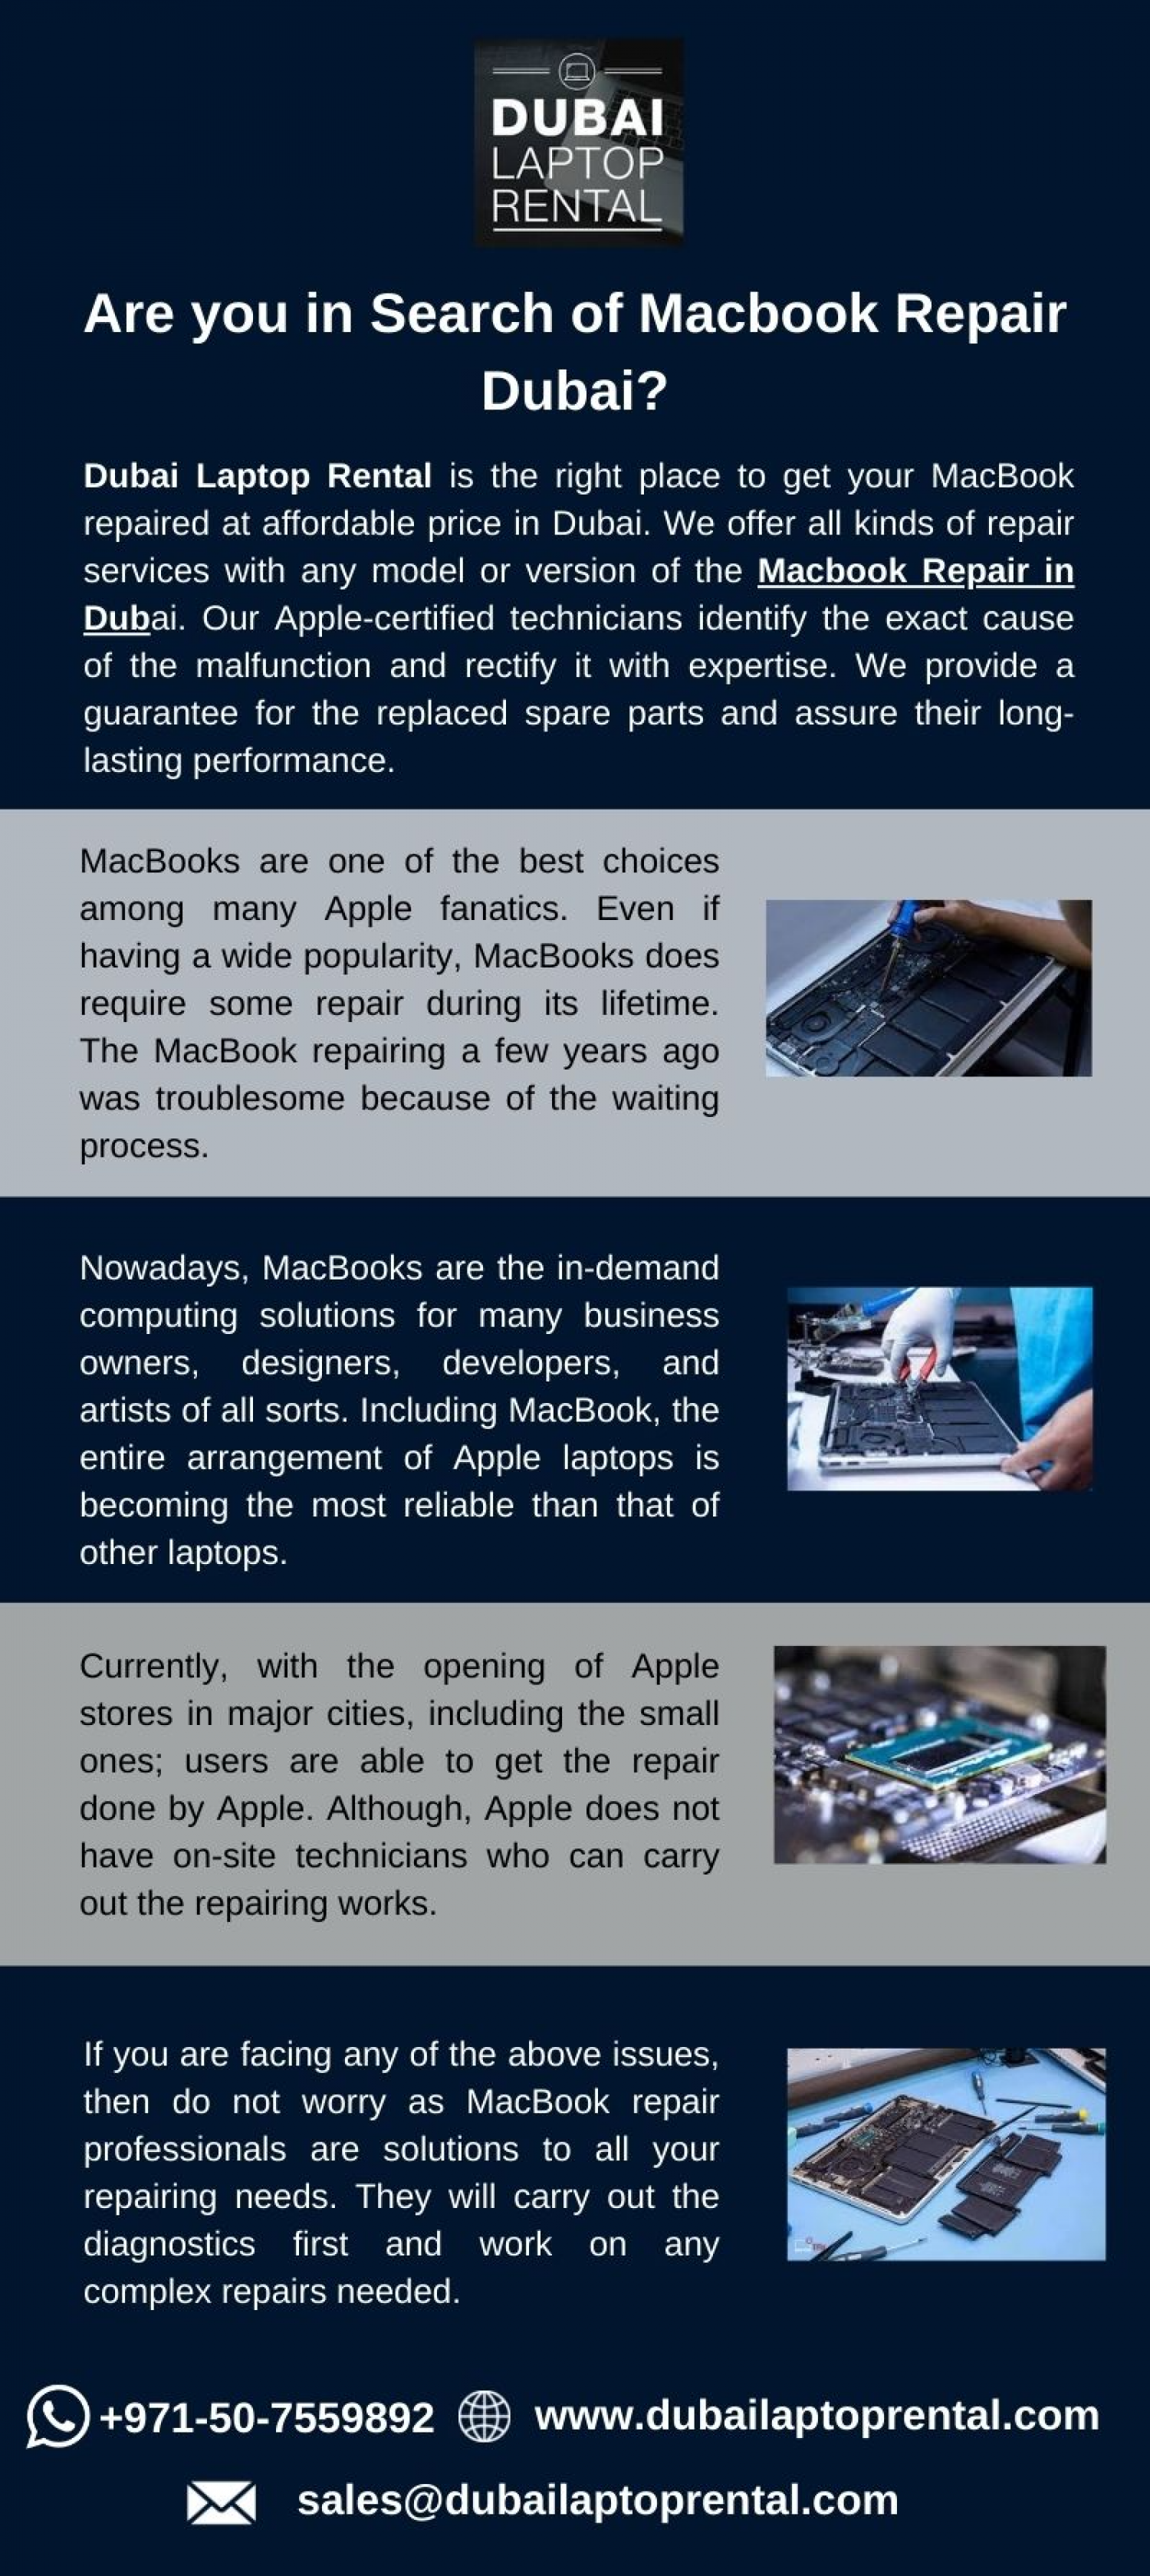 Are you in Search of Macbook Repair Dubai? Infographic